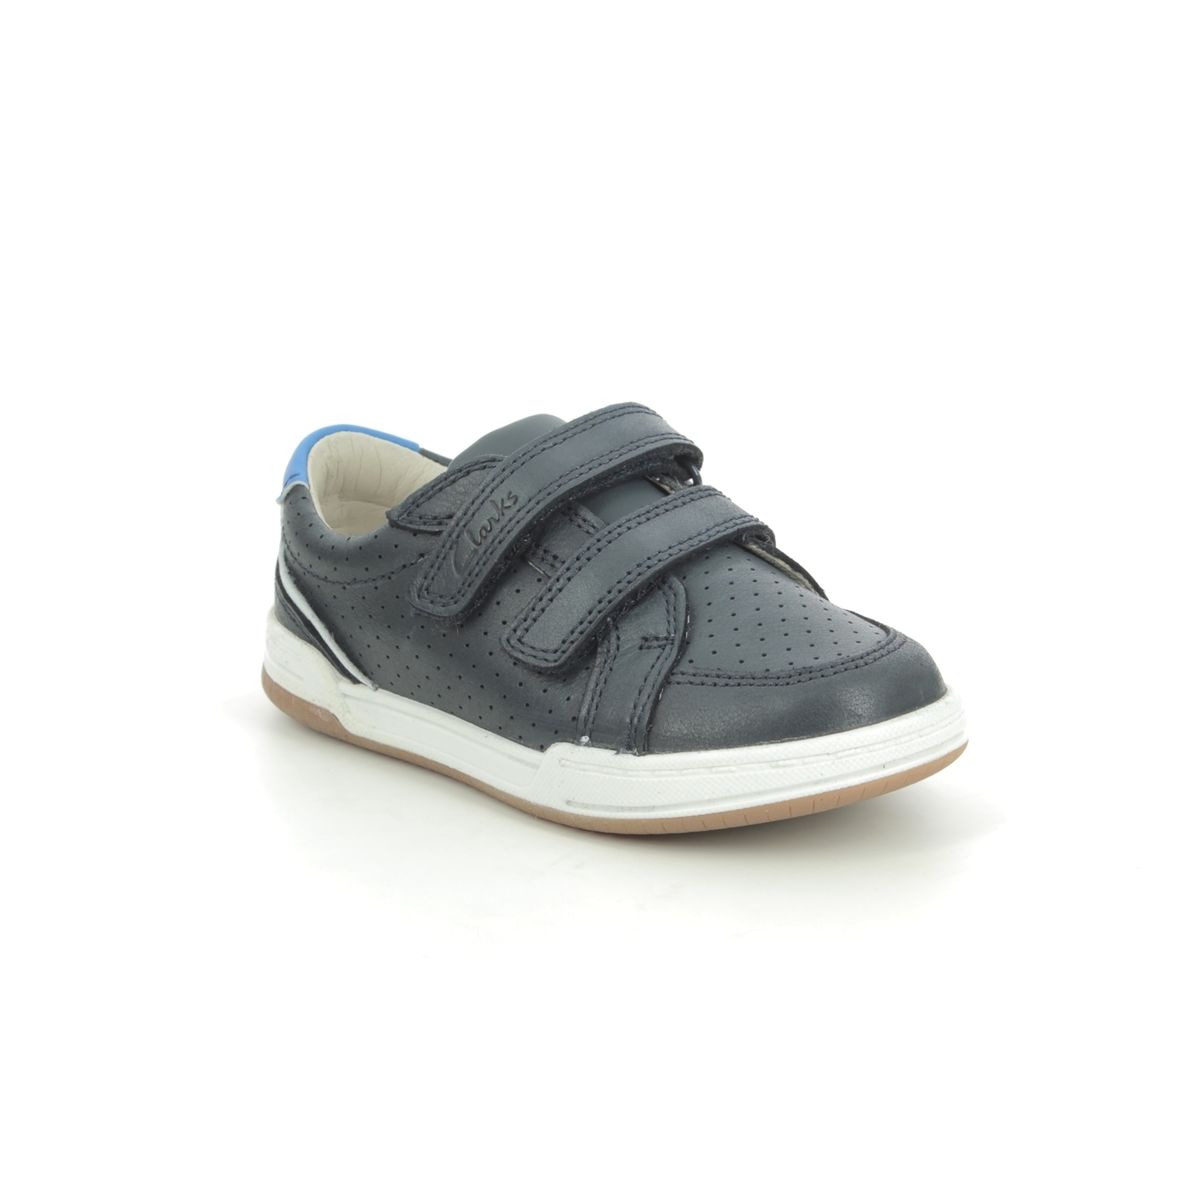 Clarks Fawn Solo T Navy Leather Kids Boys Toddler Shoes 589886F In Size 9 In Plain Navy Leather F Width Fitting Regular Fit For kids